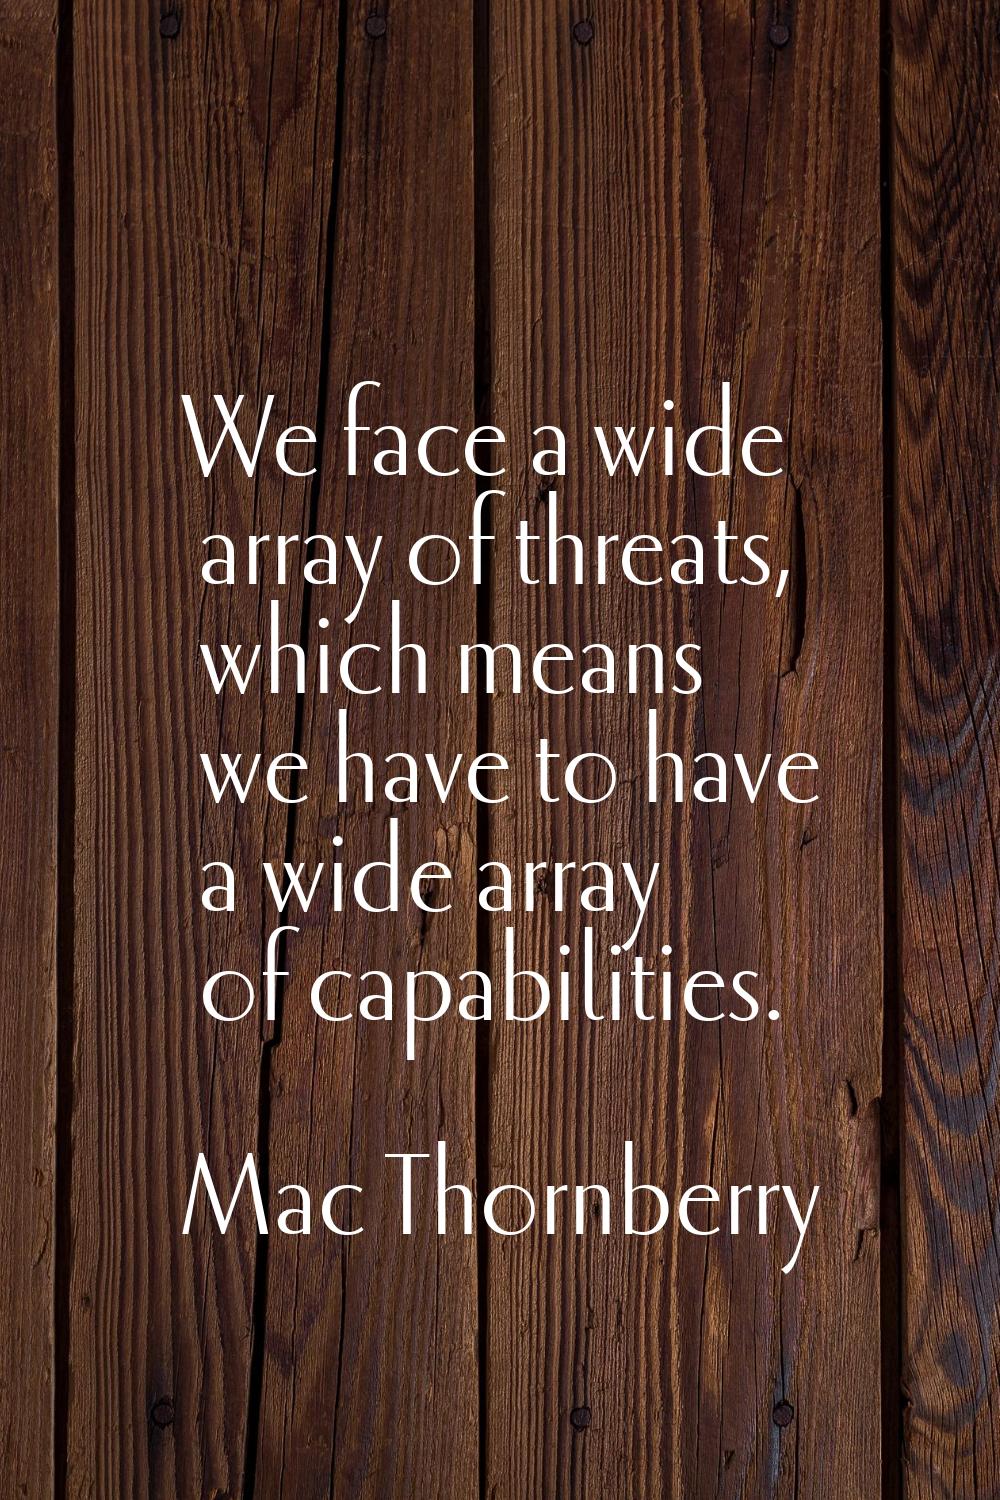 We face a wide array of threats, which means we have to have a wide array of capabilities.